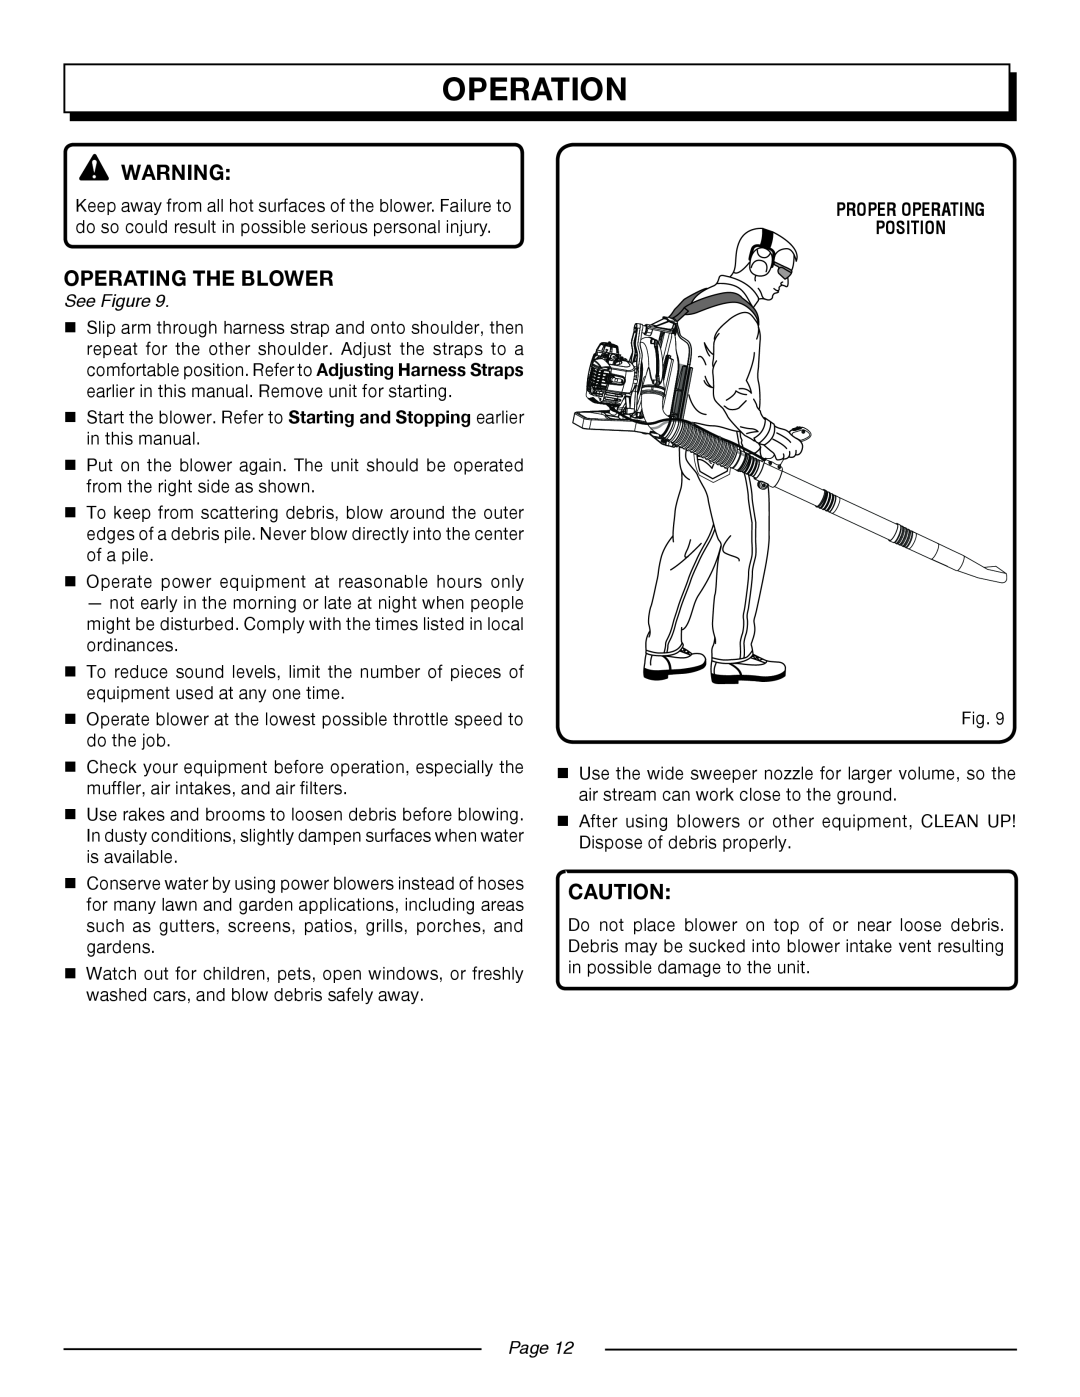 Homelite UT08981, UT08580 manual Operating The Blower, operation, See Figure, proper operating position, Page 